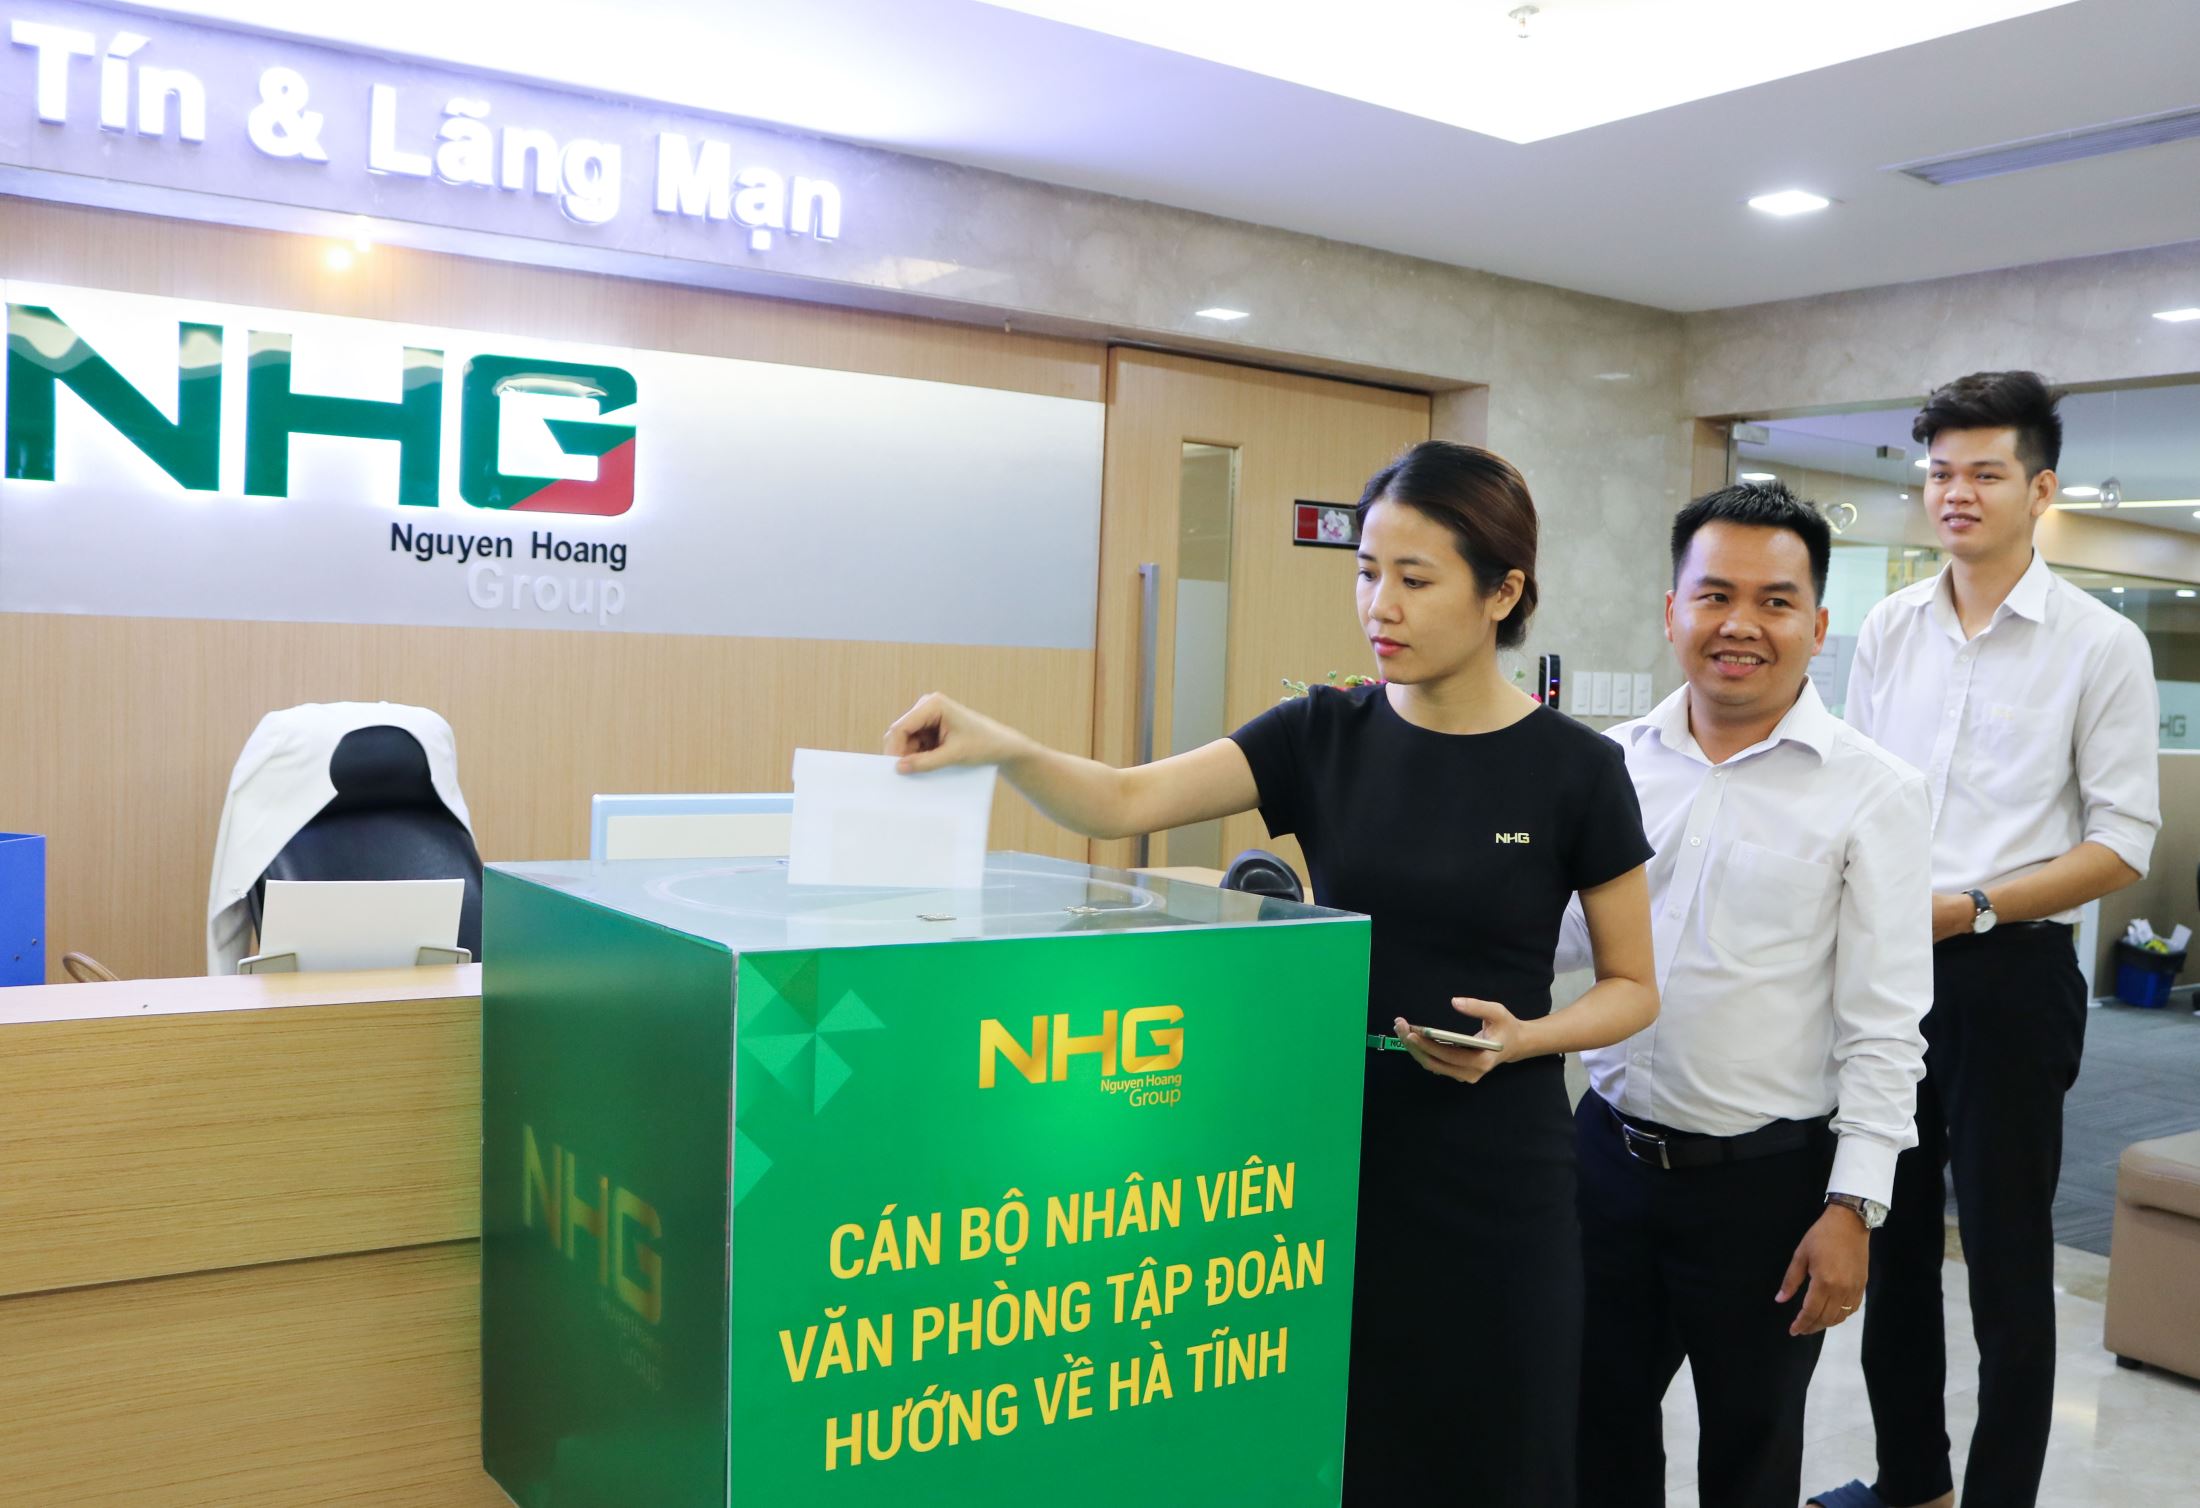 NHG staffs donated to help hurricane victims in Ha Tinh province, spreading the human spirit and appreciating the human values ​​of the Group